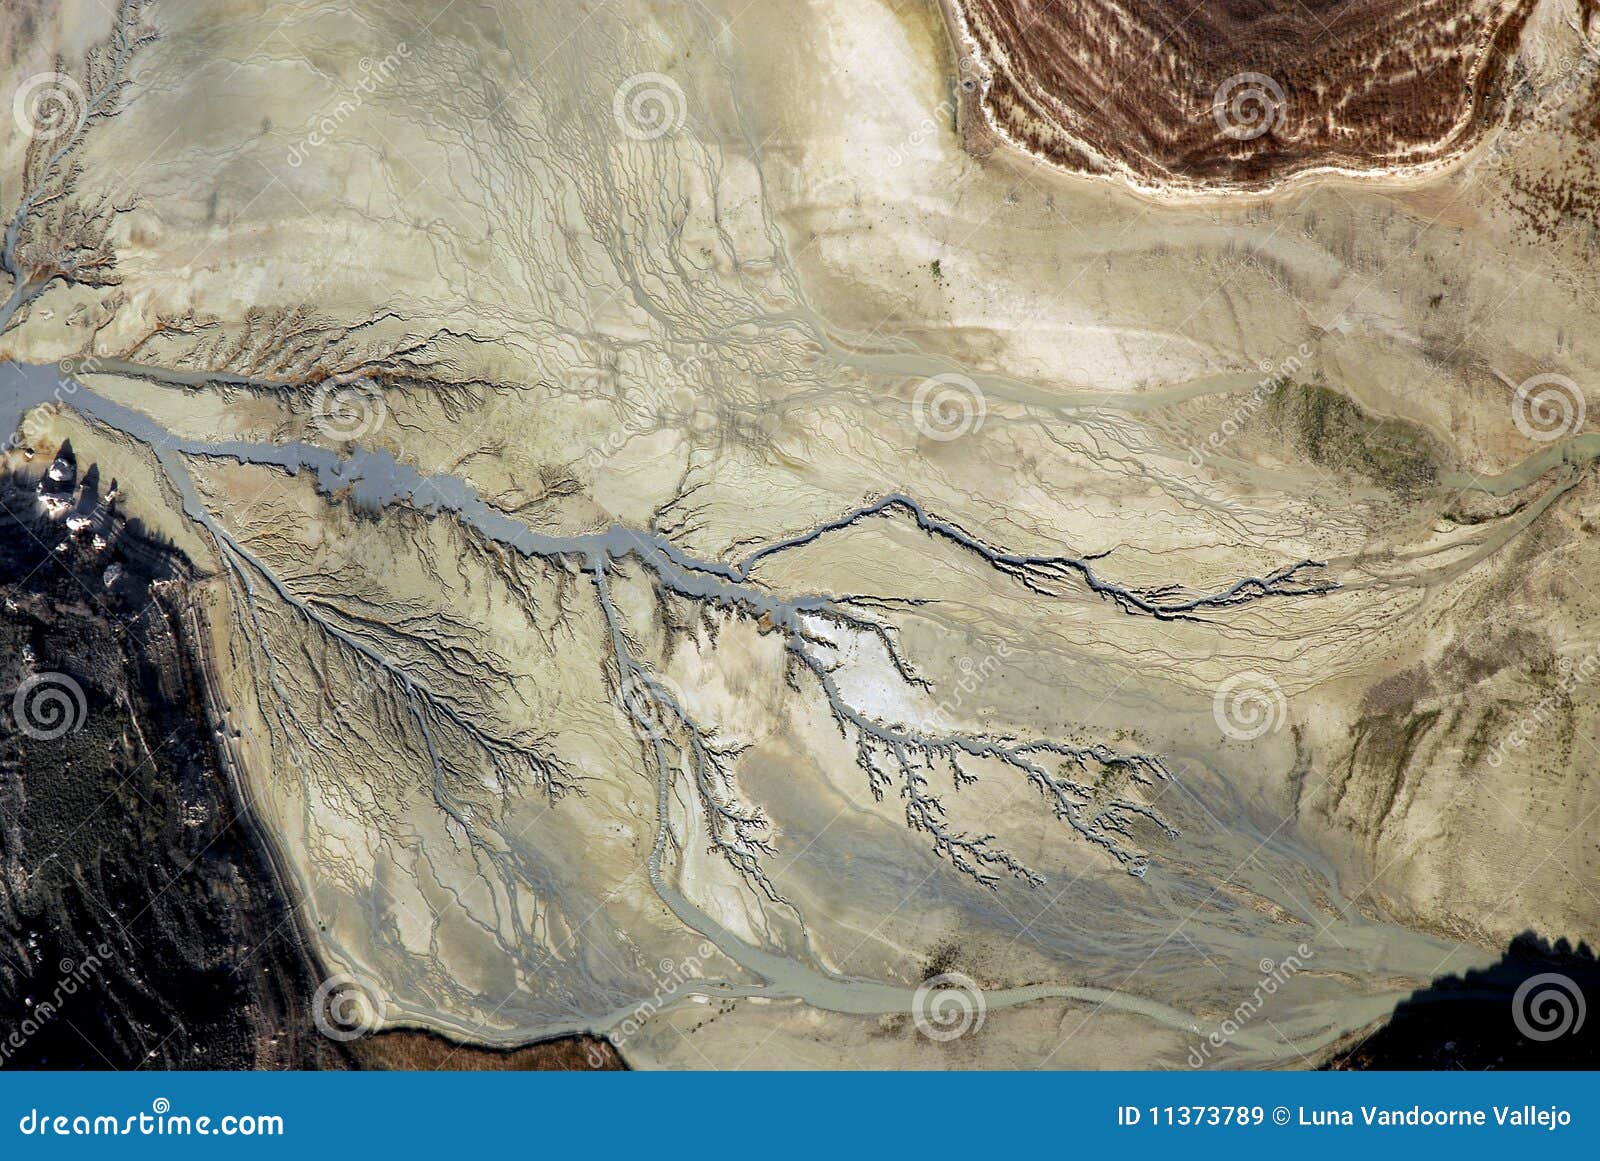 aerial view of spanish geographic feature